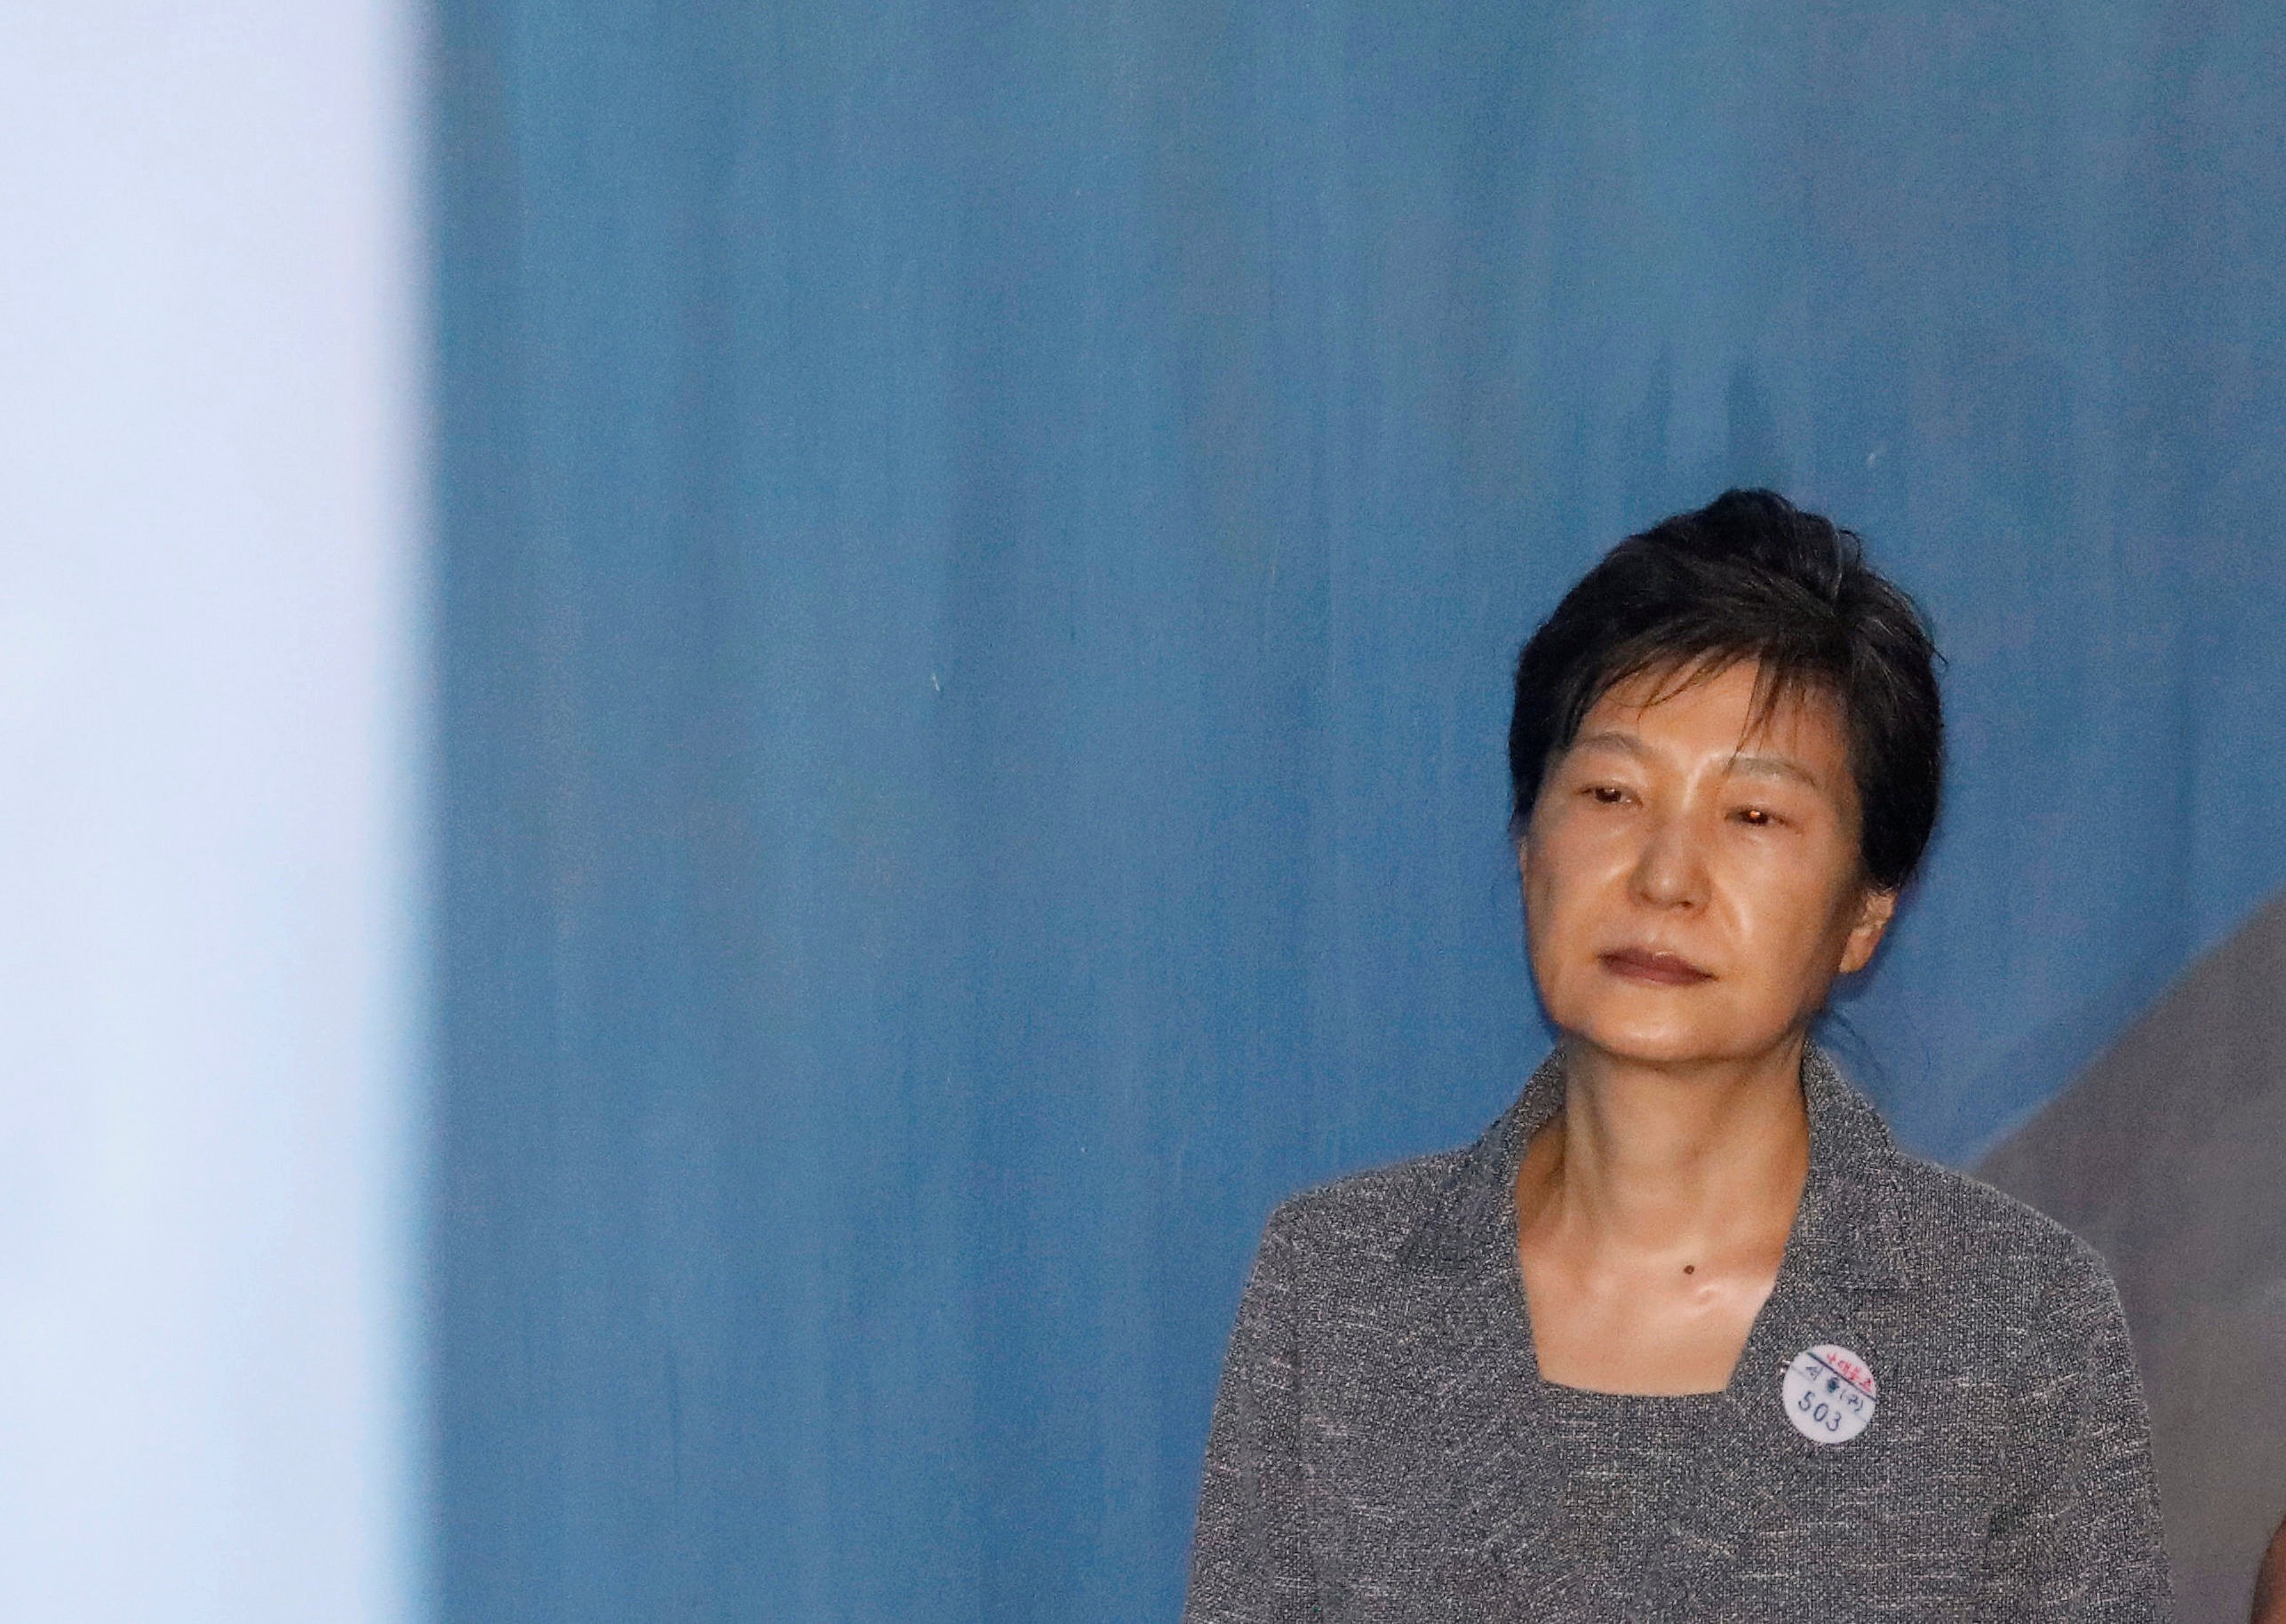 North Korea on Saturday called disgraced former South Korean president Park Geun-hye (pictured) a ‘traitor’ after she was sentenced to 24 years in prison on corruption charges. Photo: Reuters